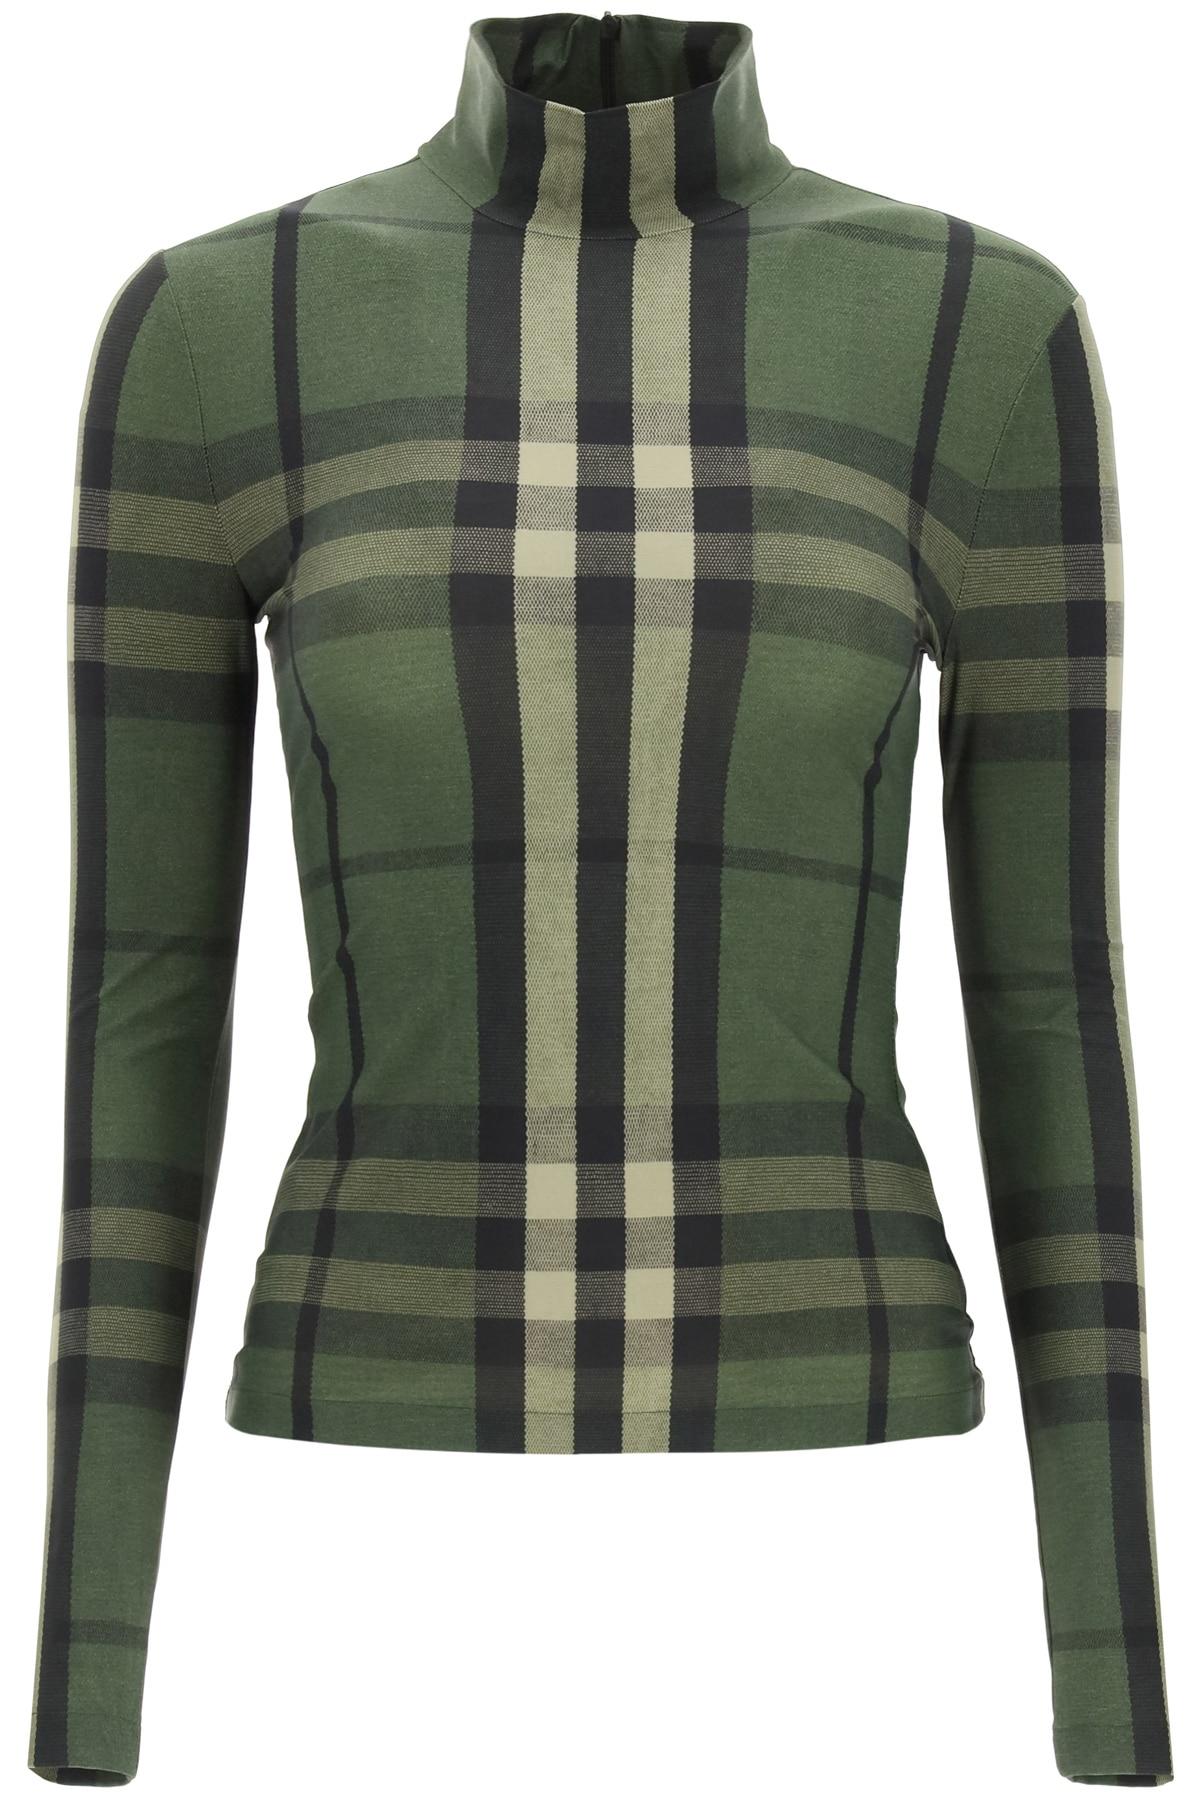 Burberry High Neck Top With Check Motif in Military Green ip ch 